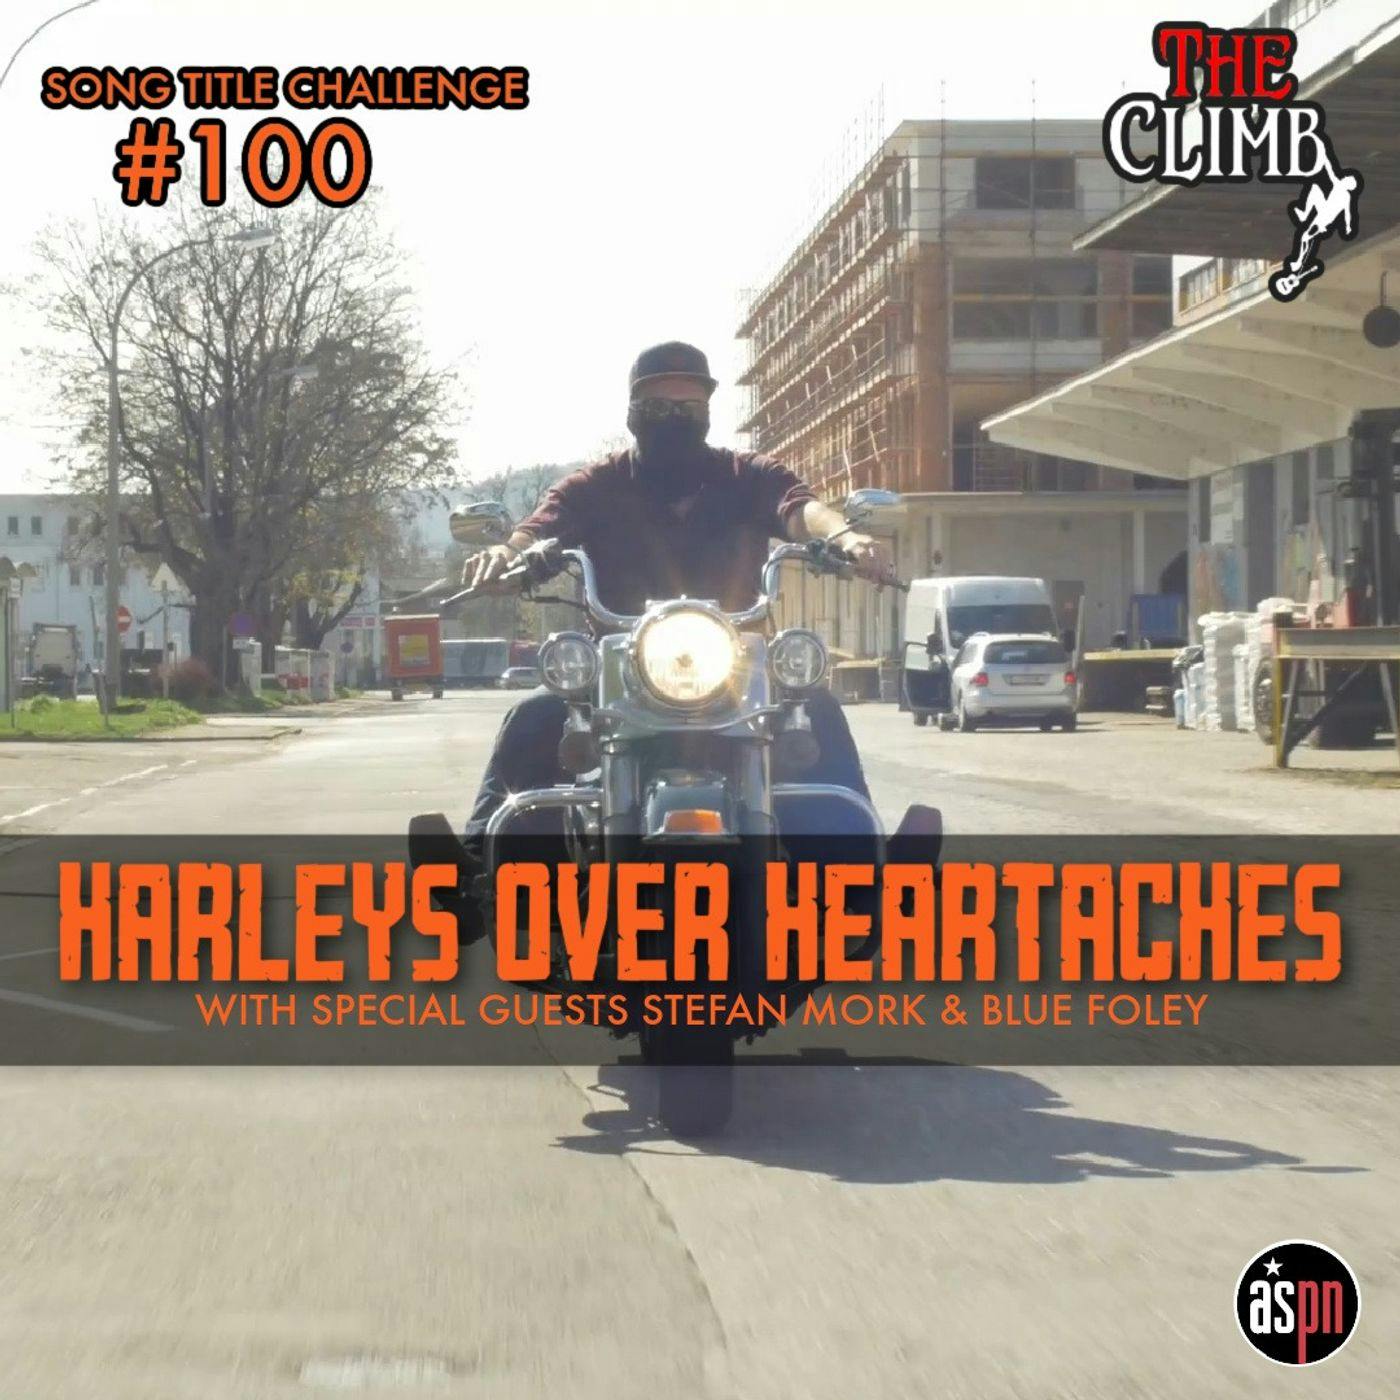 Song Title Challenge #100: Harleys Over Heartaches